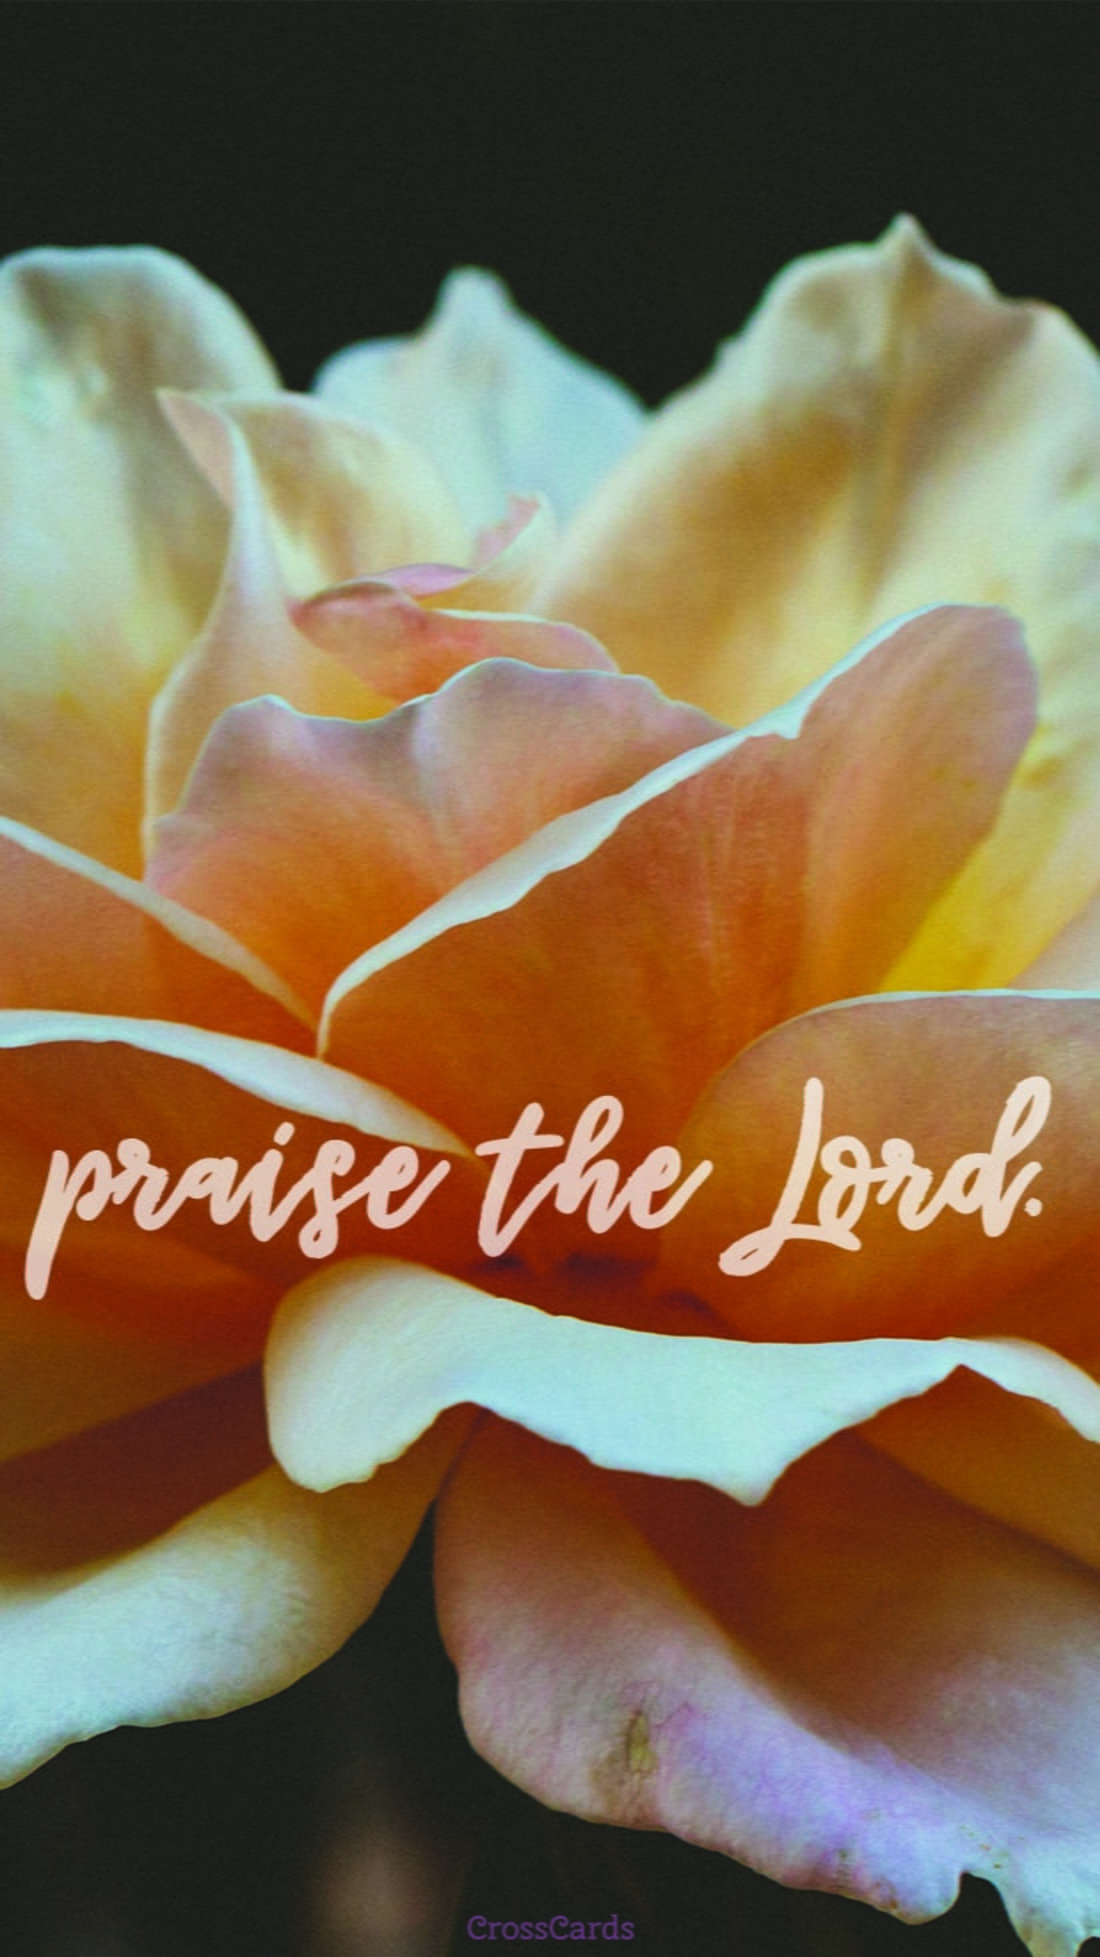 Praise the Lord mobile phone wallpaper